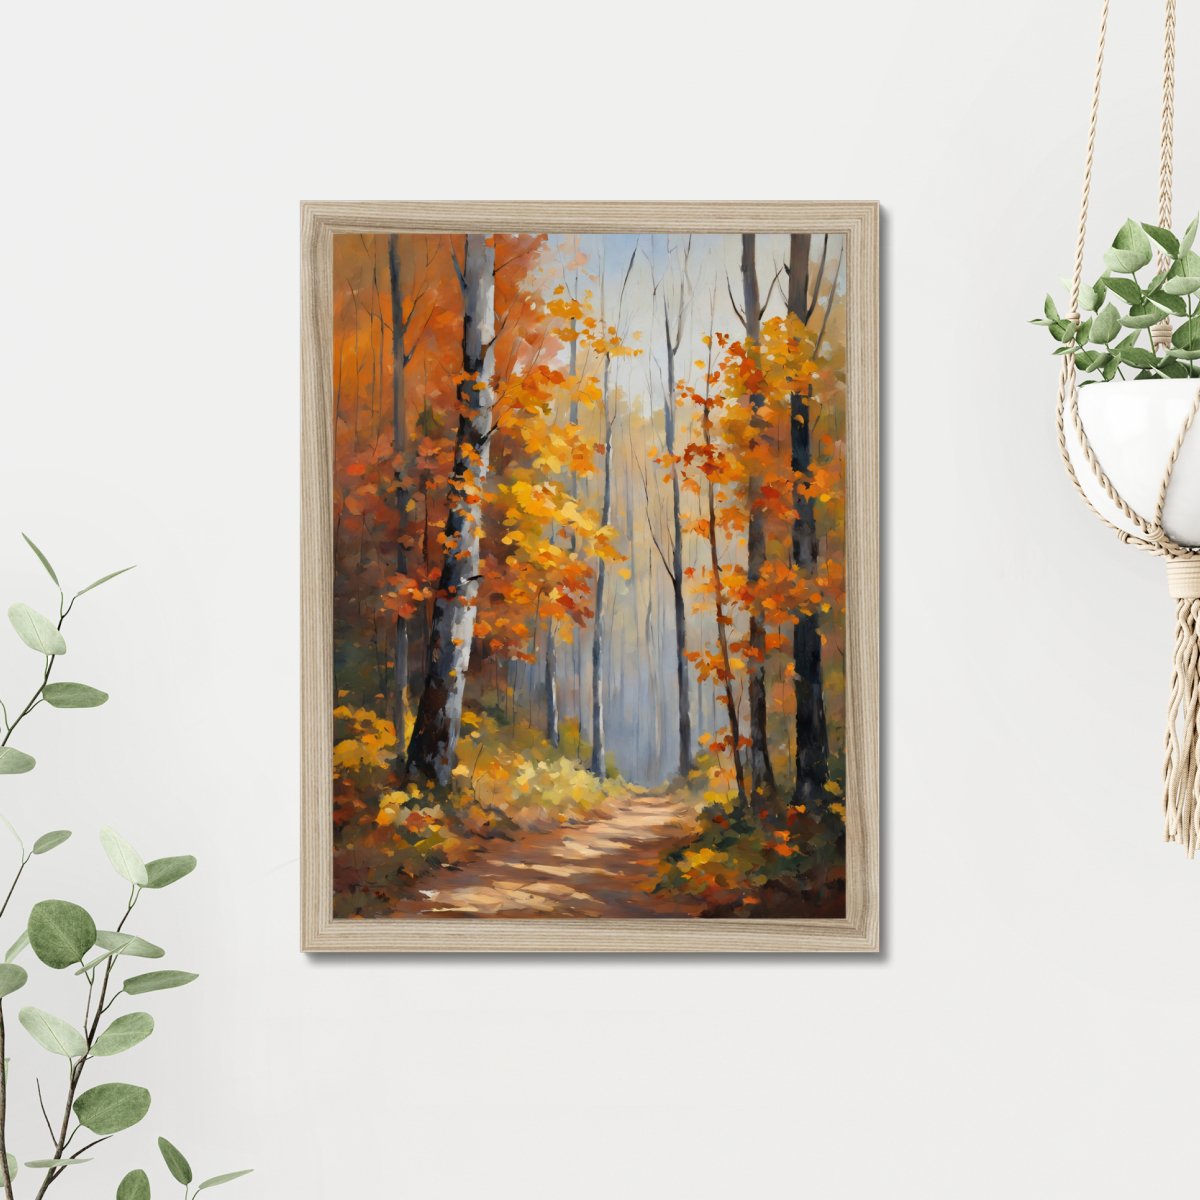 Autumn forest path - Art print - Poster - Ever colorful